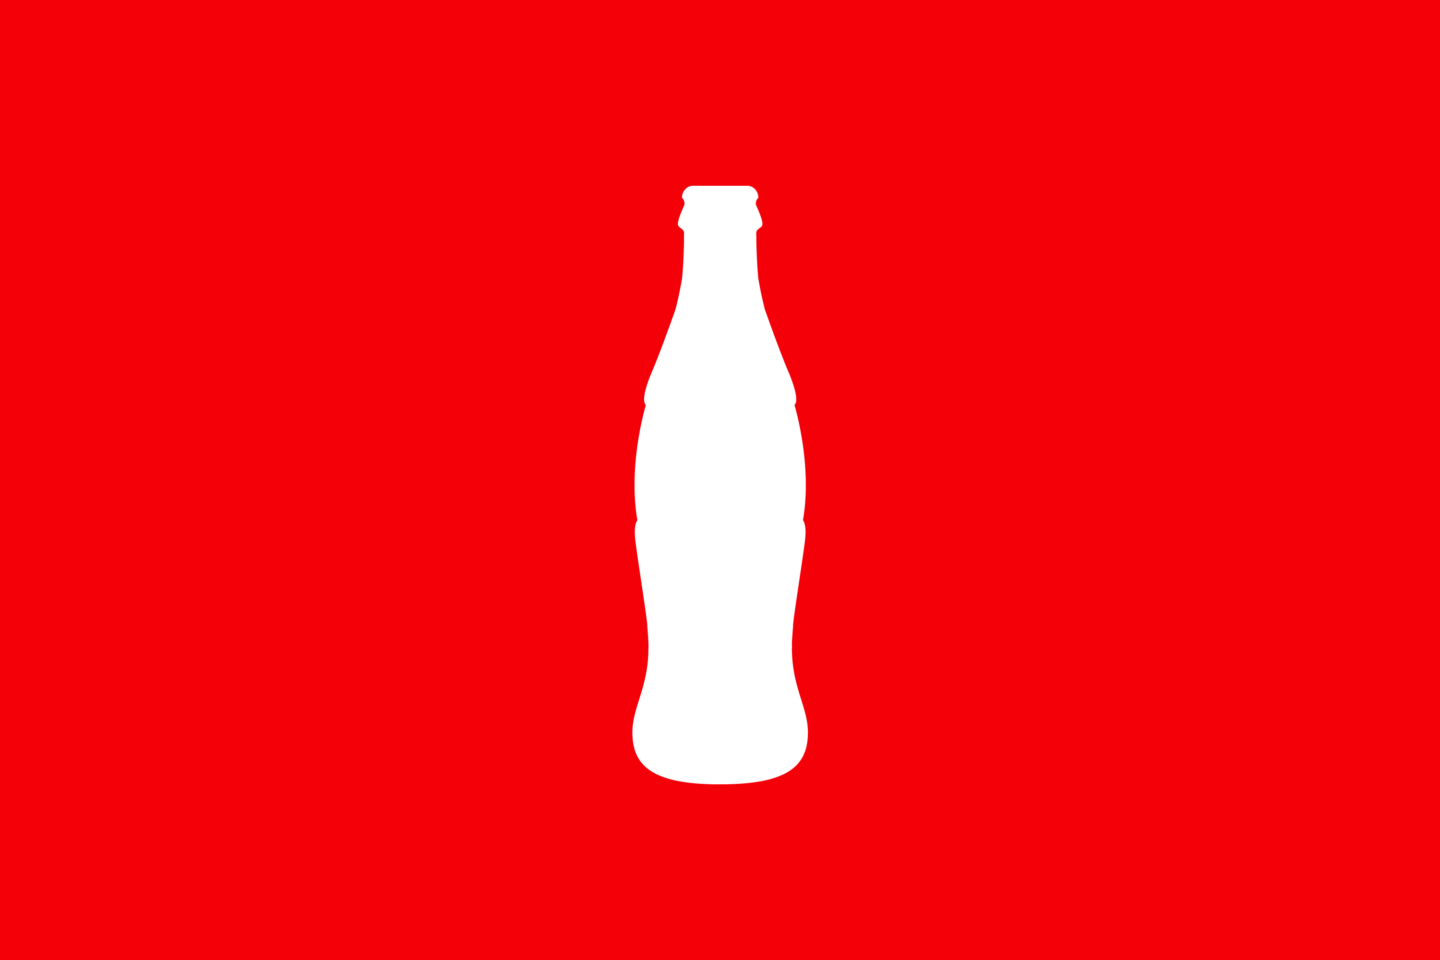 coca-cola silhouette as an example of strong branding